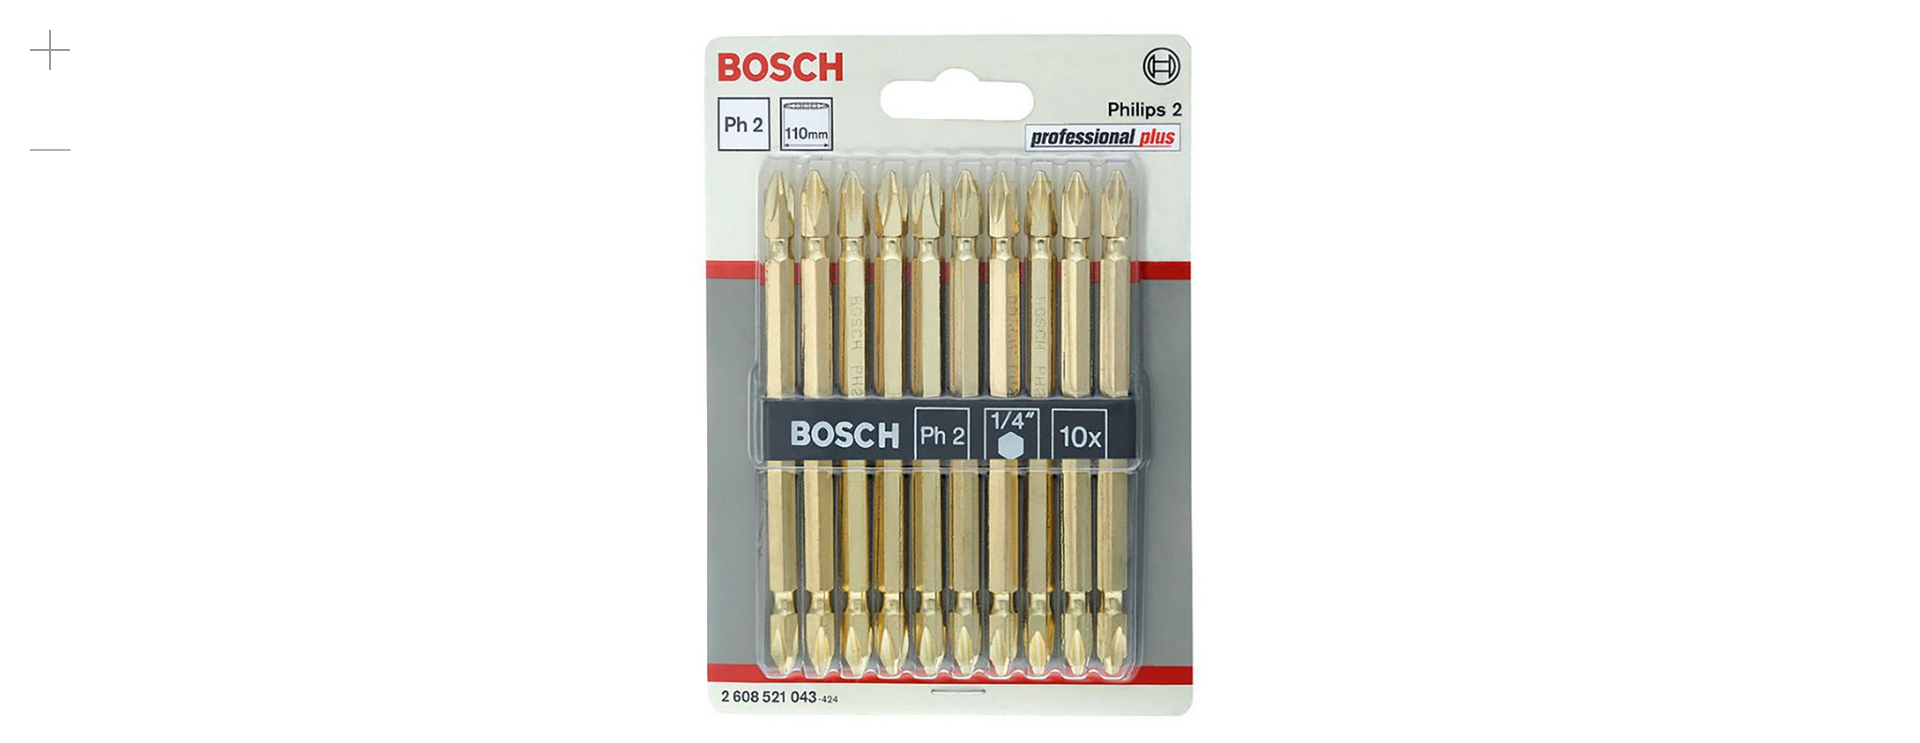 Bosch 2608521043 110 mm Double Ended Bit Set PH2/PH2 - Pack of 10